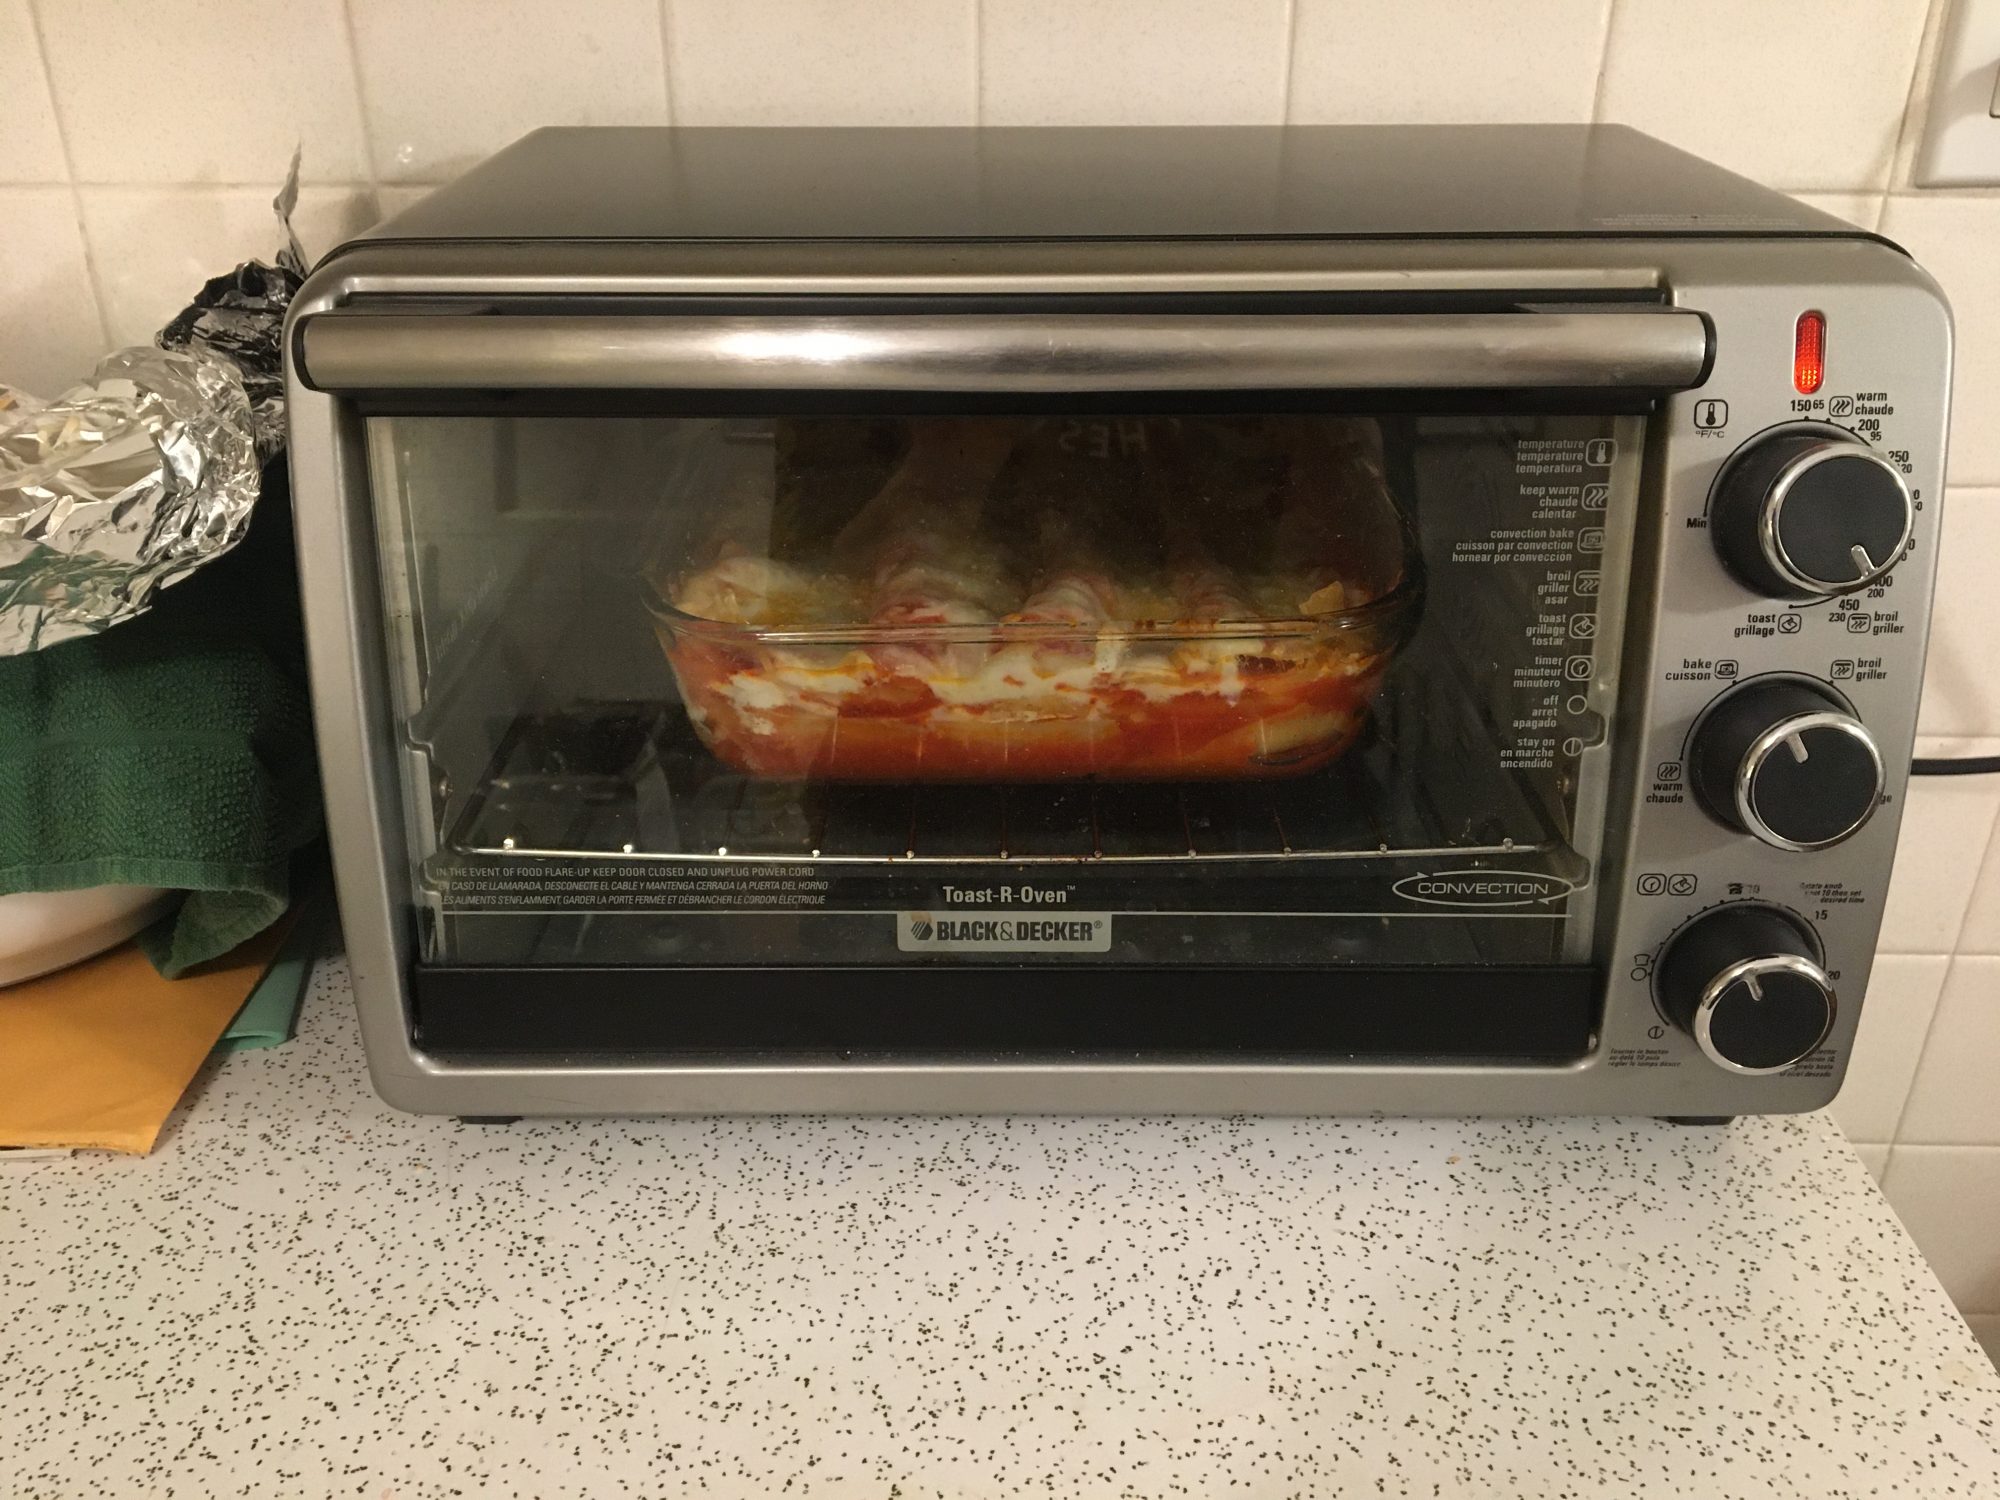 What Can I Cook In Toaster Oven